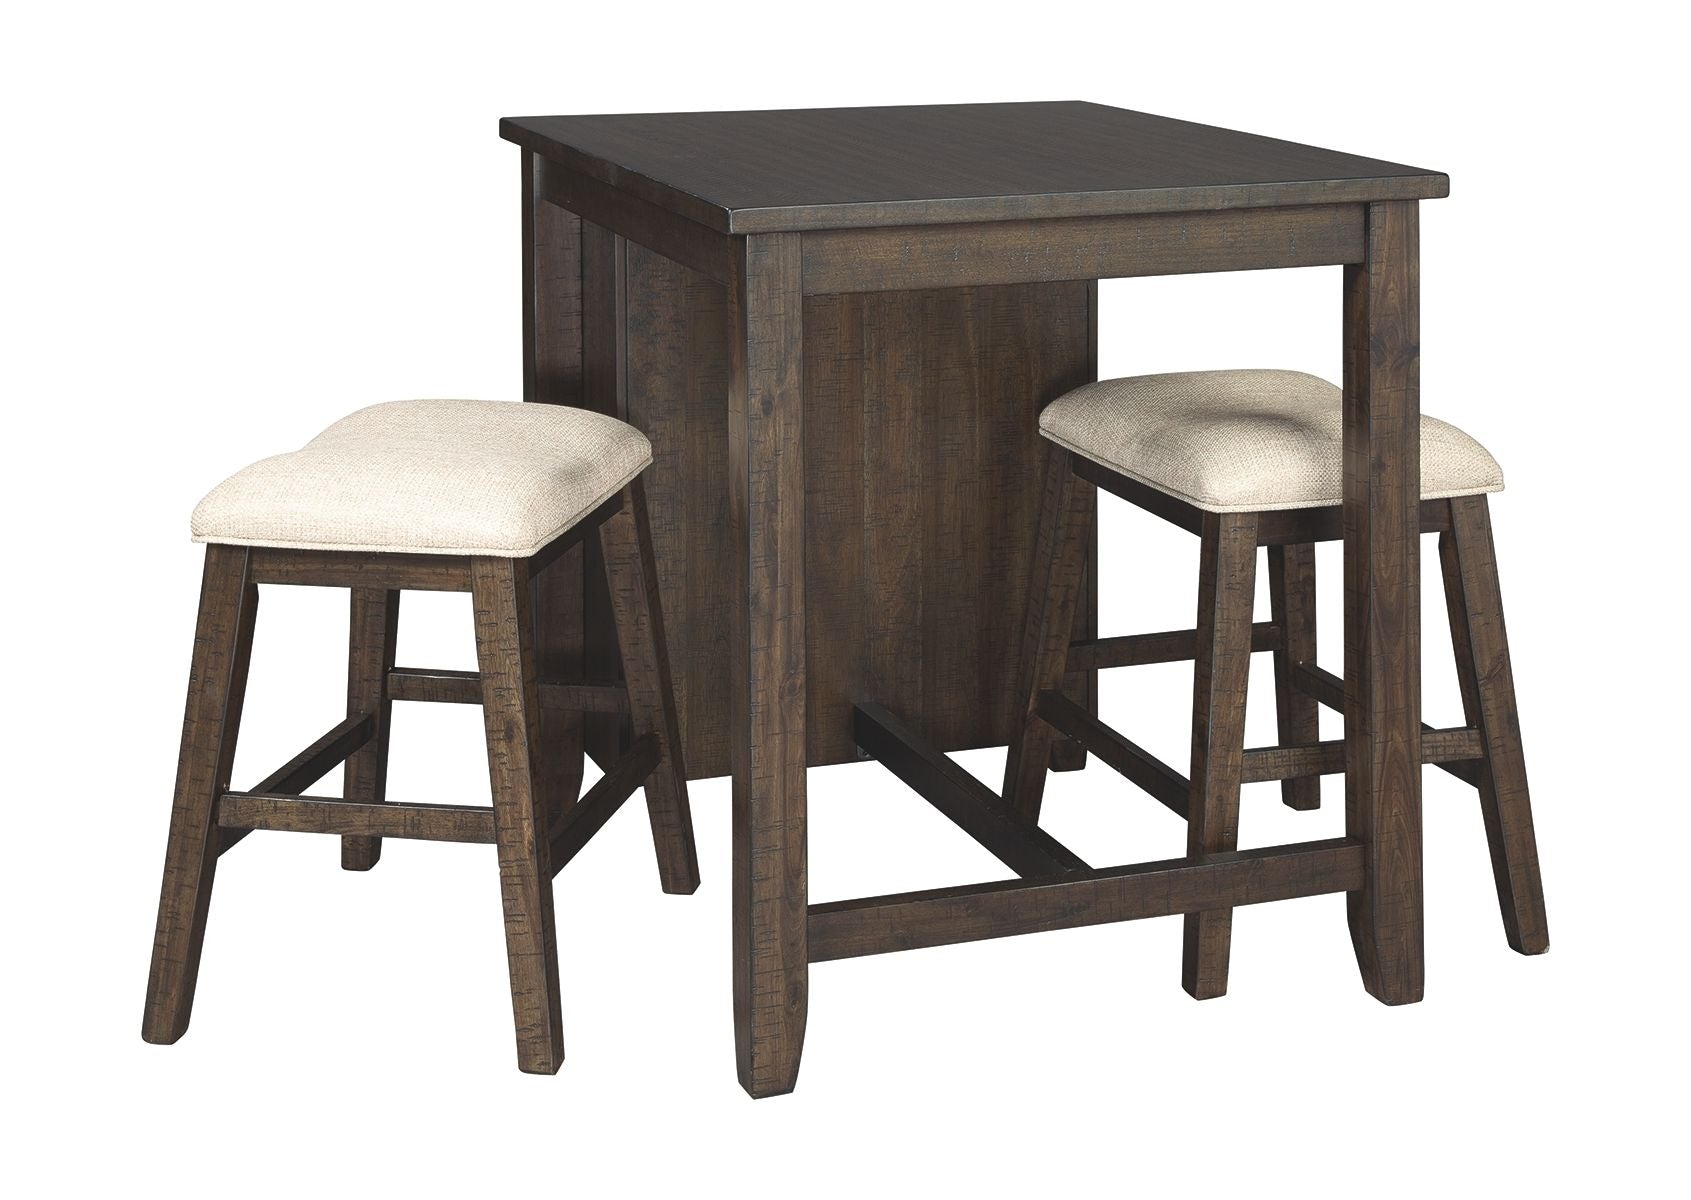 Rokane Counter Height Dining Room Table And Chairs